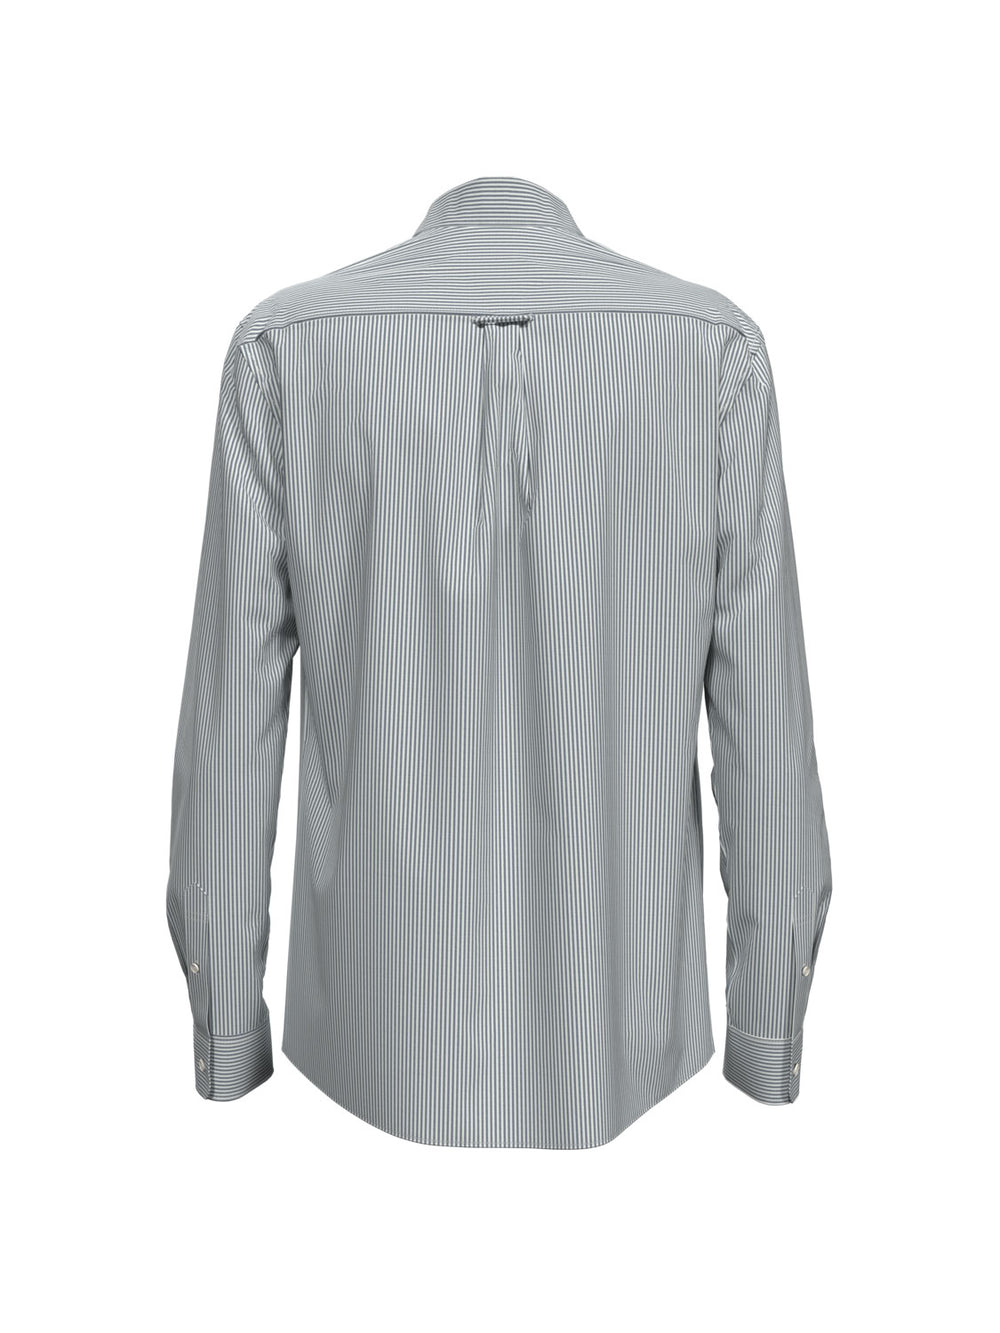 Essential Cotton Oxford Stripe Shirt in Steel Stripe | Buster McGee